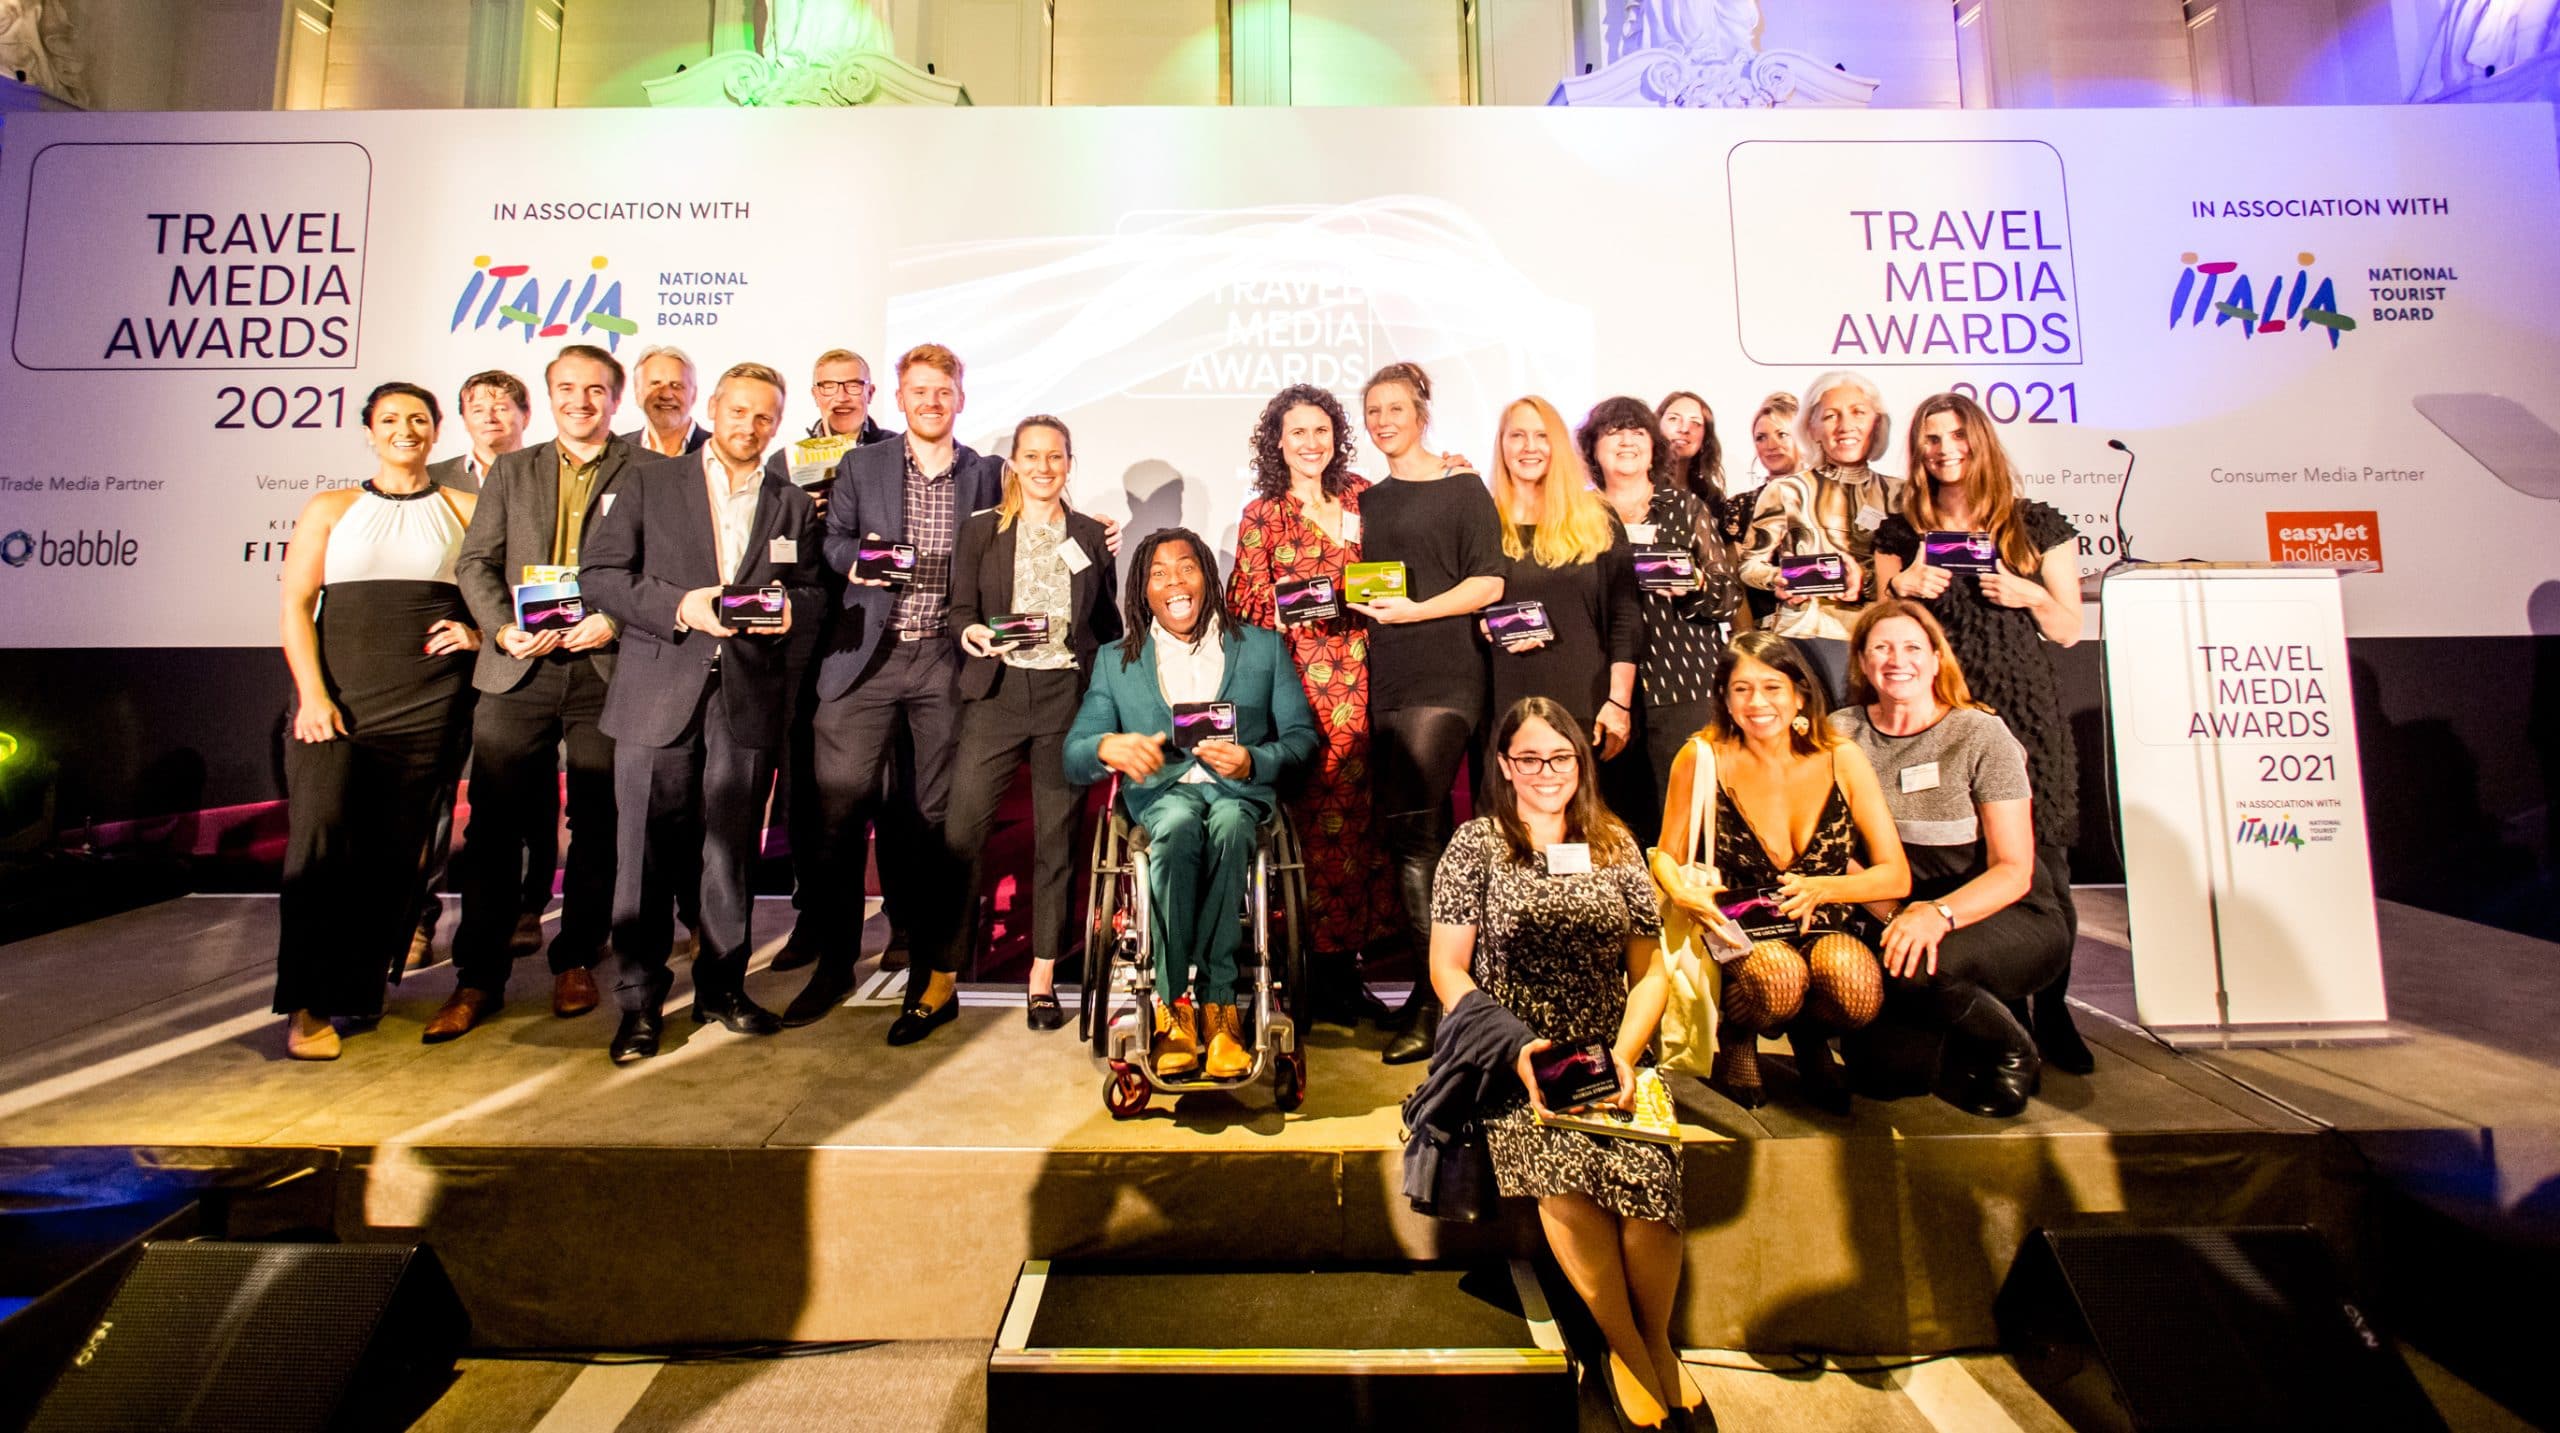 The winners of the Travel Media Awards 2021. Image: Hannan Images